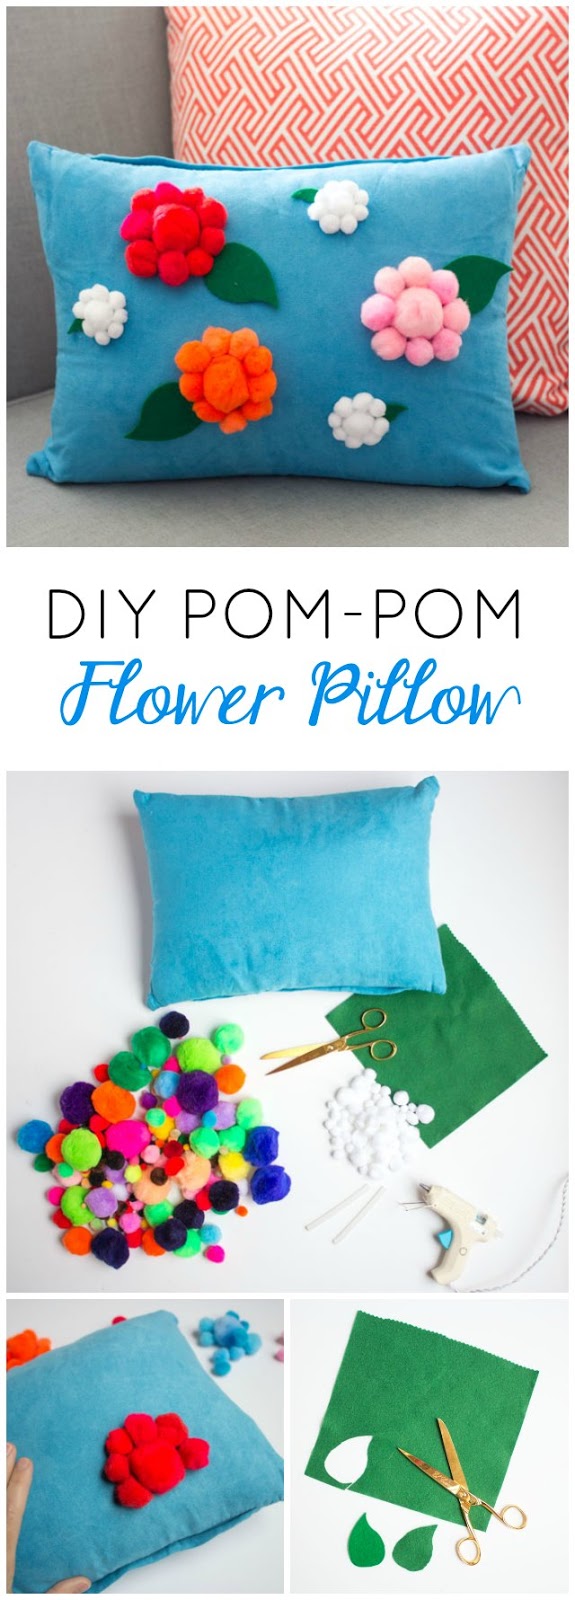 Make this pom-pom flower pillow in under an hour!